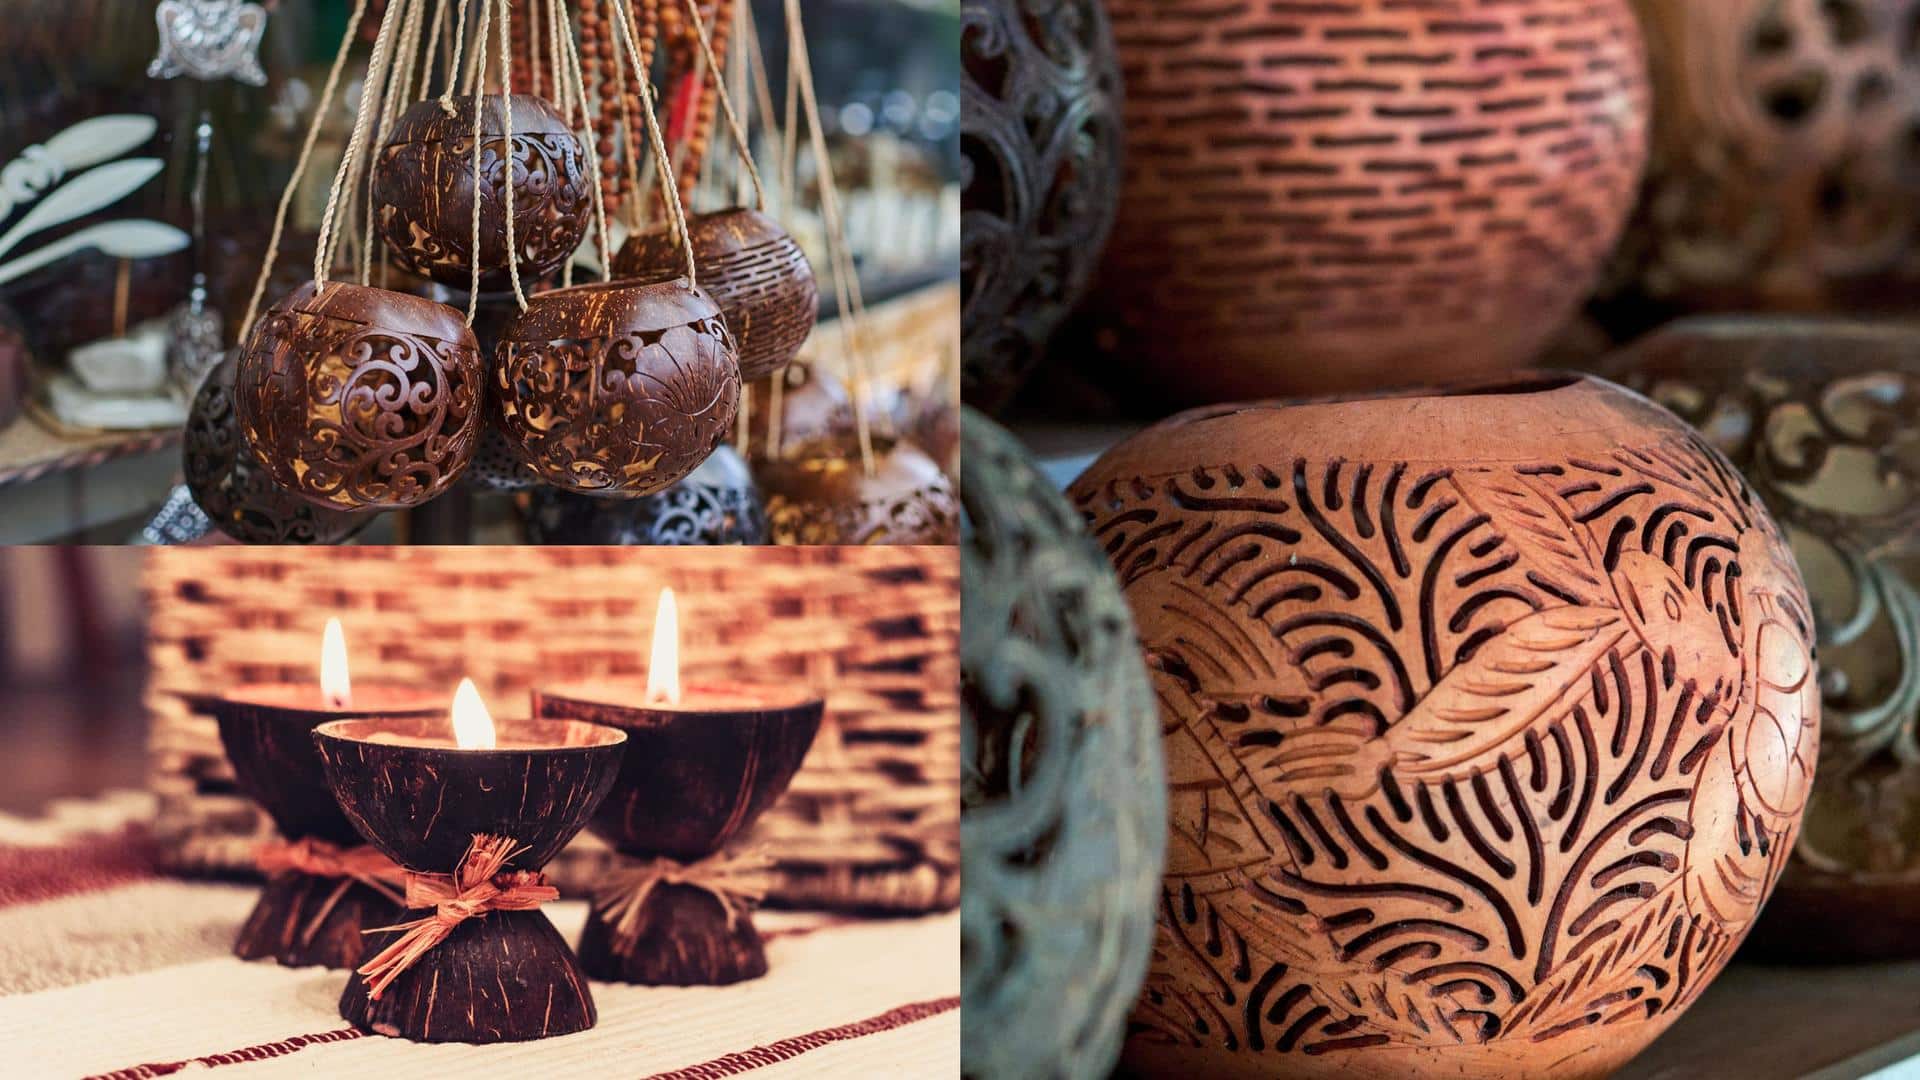 5 ways coconut shells can spruce up your home decor